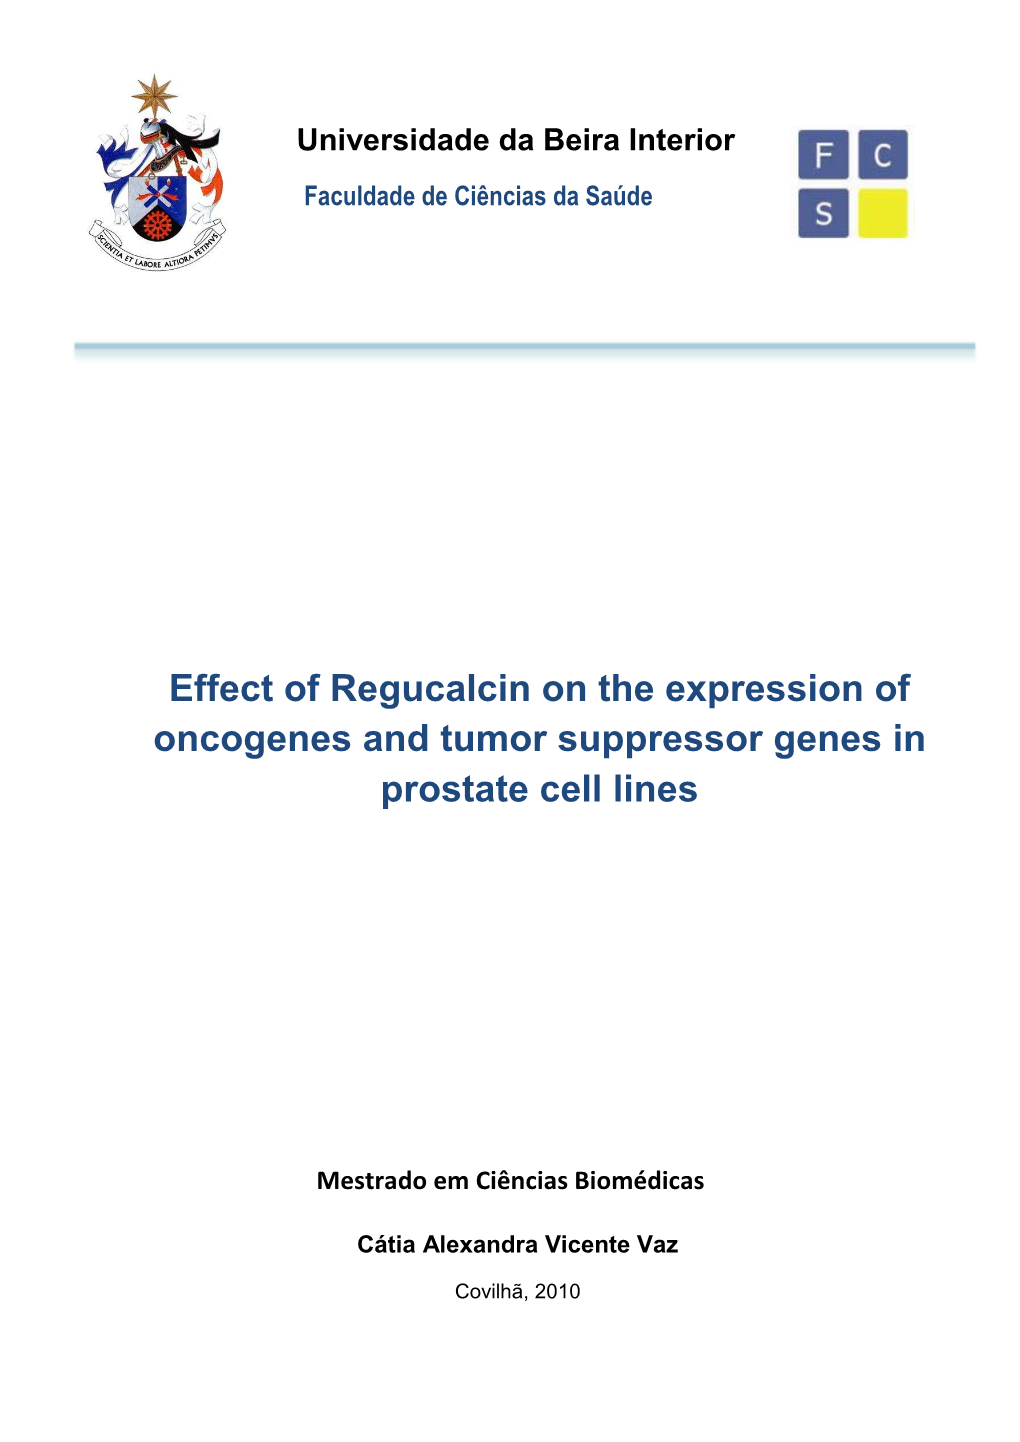 Effect of Regucalcin on the Expression of Oncogenes and Tumor Suppressor Genes in Prostate Cell Lines